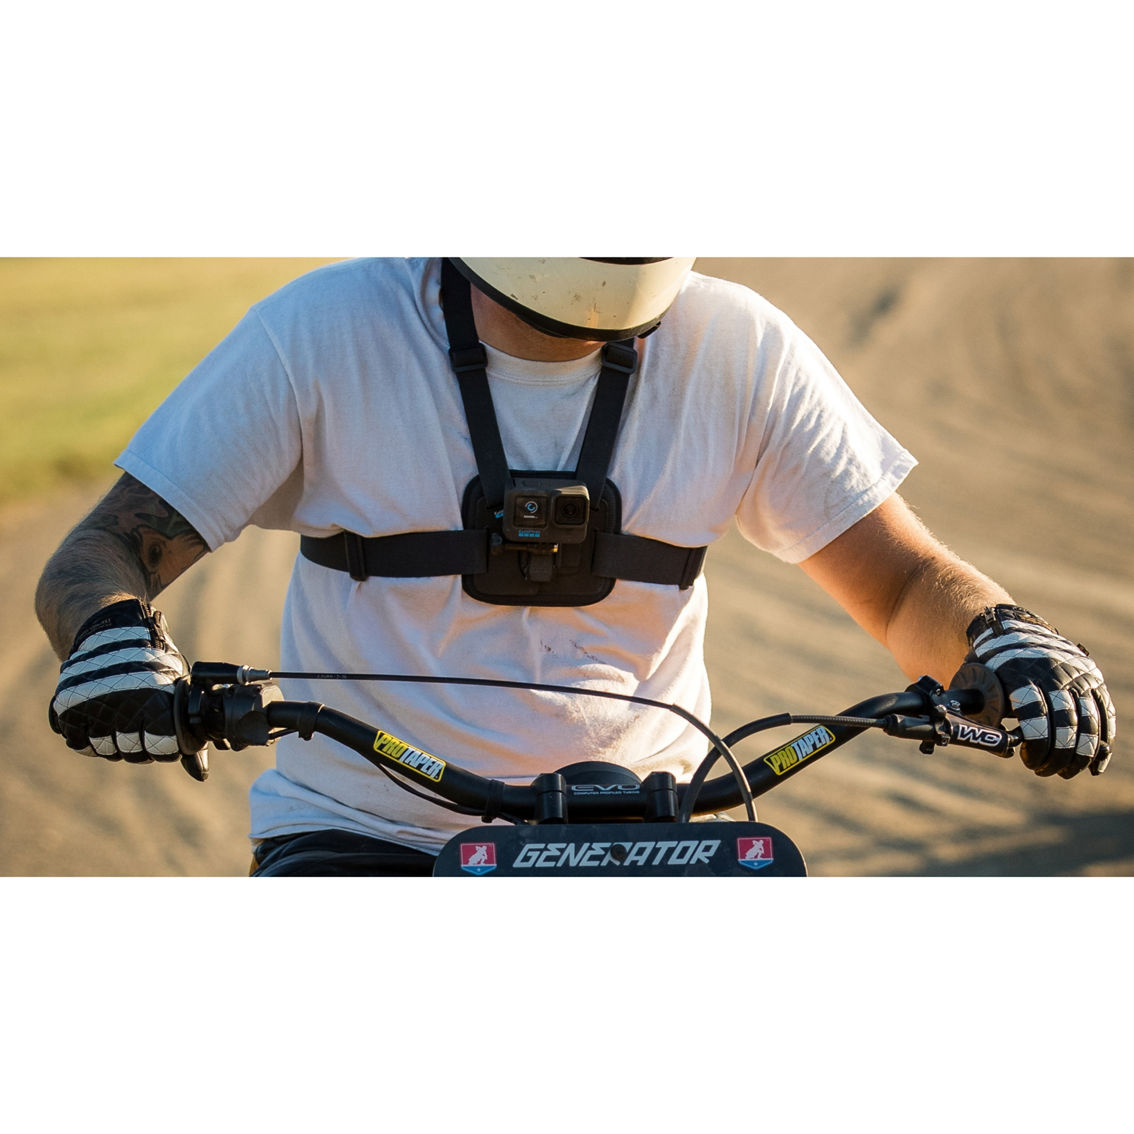 GoPro Chest Mount Camera Harness works with all GoPro camera's - Image 4 of 4